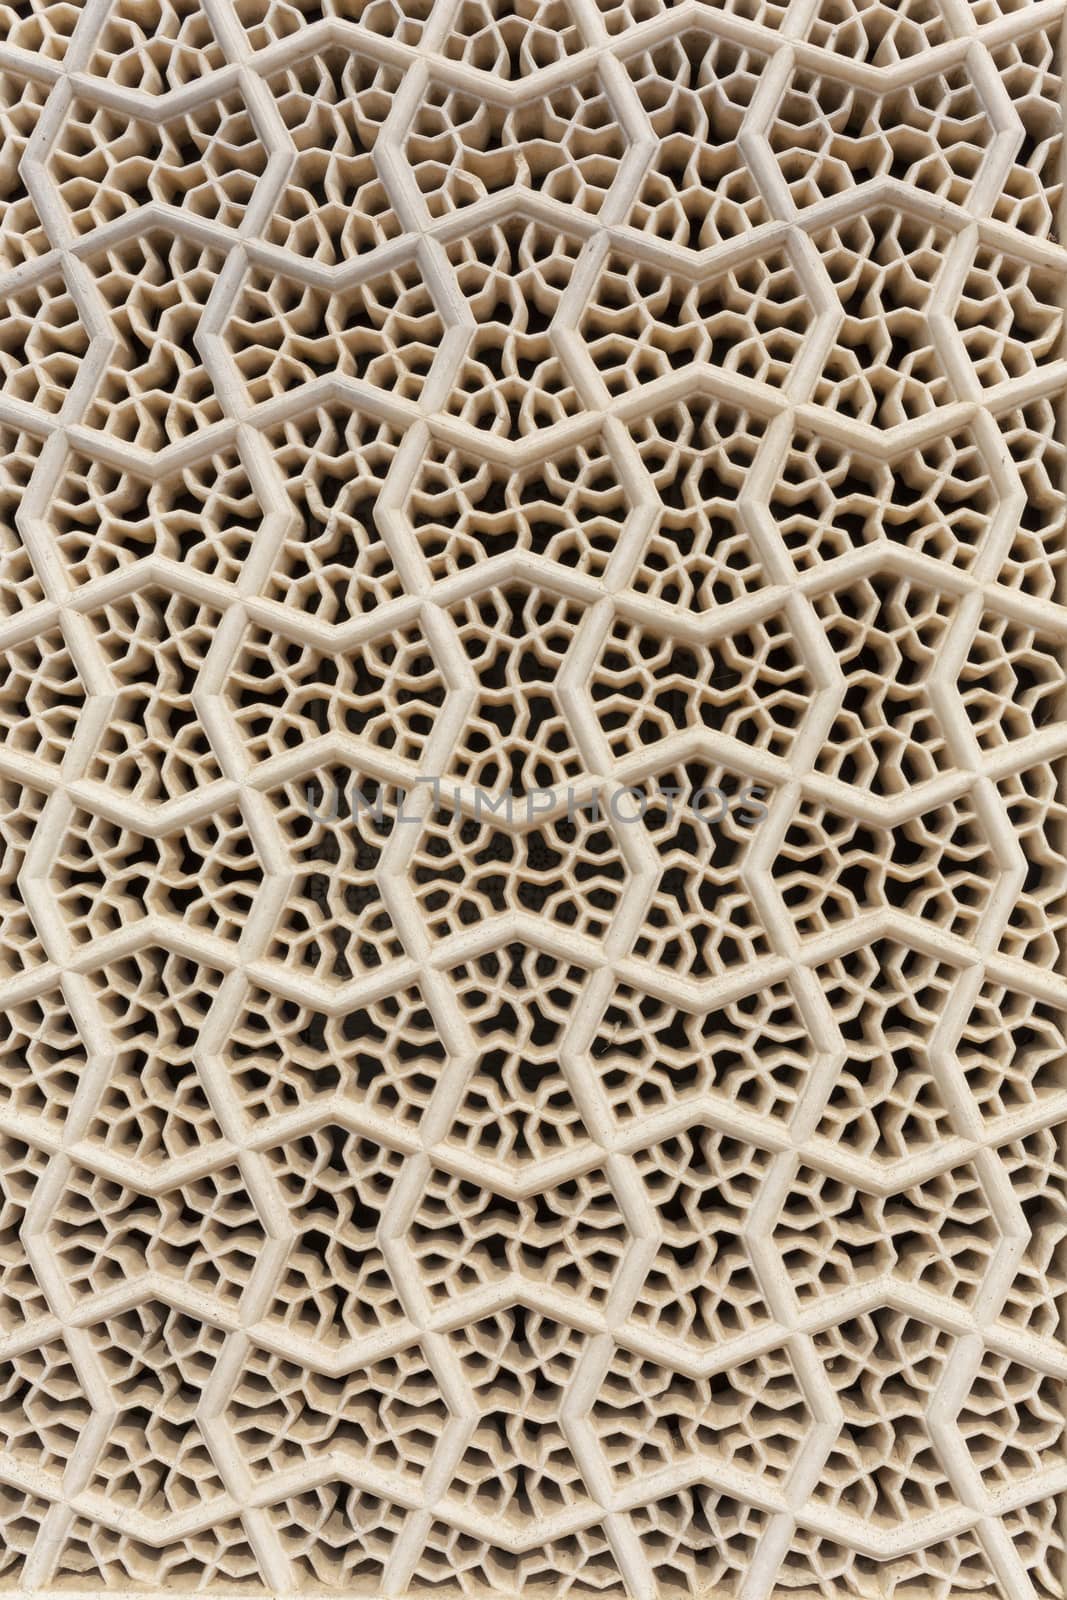 Perforated wall in the building of the palace in the Amber Fort, Jaipur, India